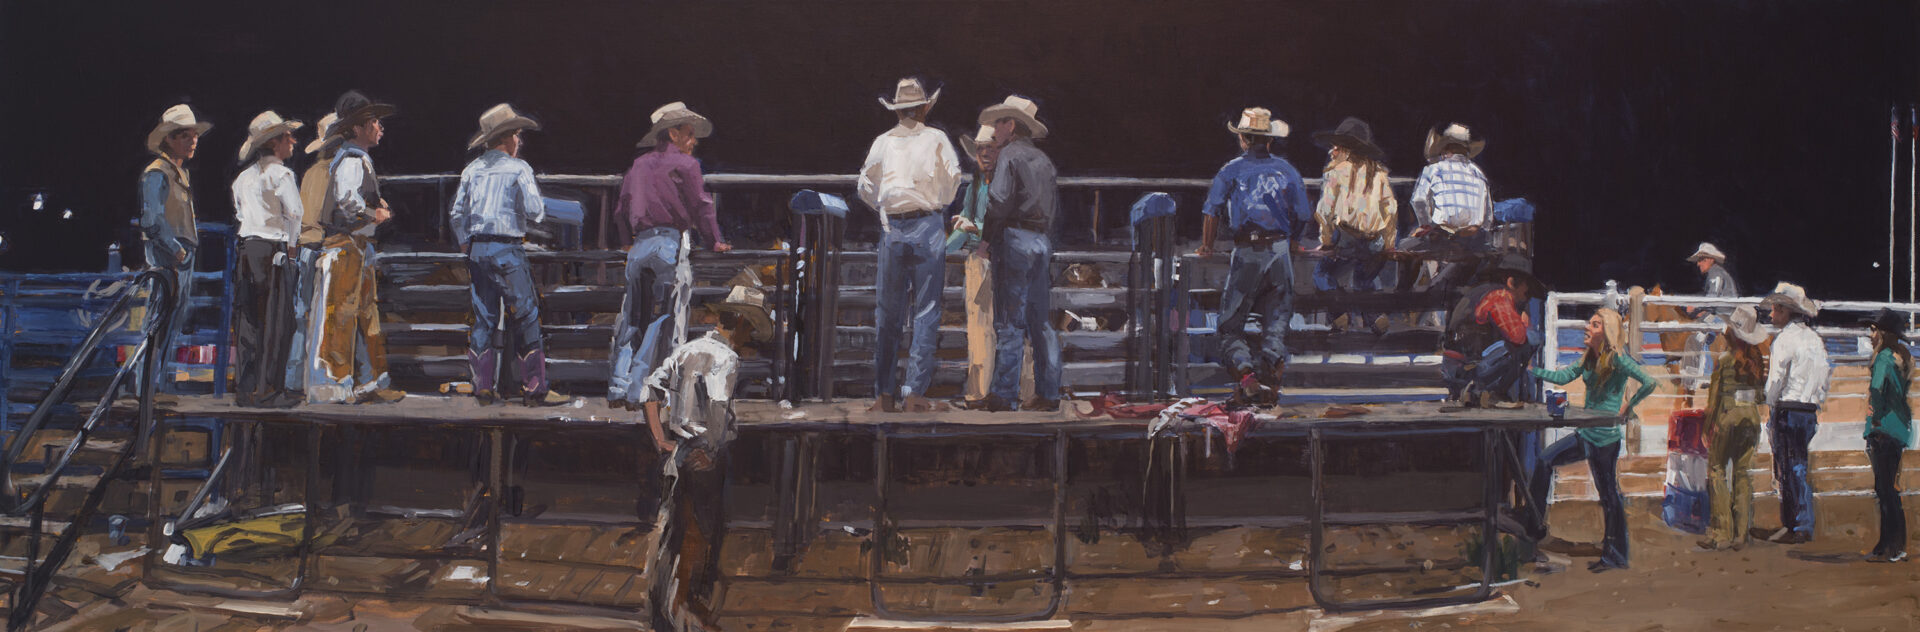 NIGHT RODEO<br>
2014<br>
20" x 60"
